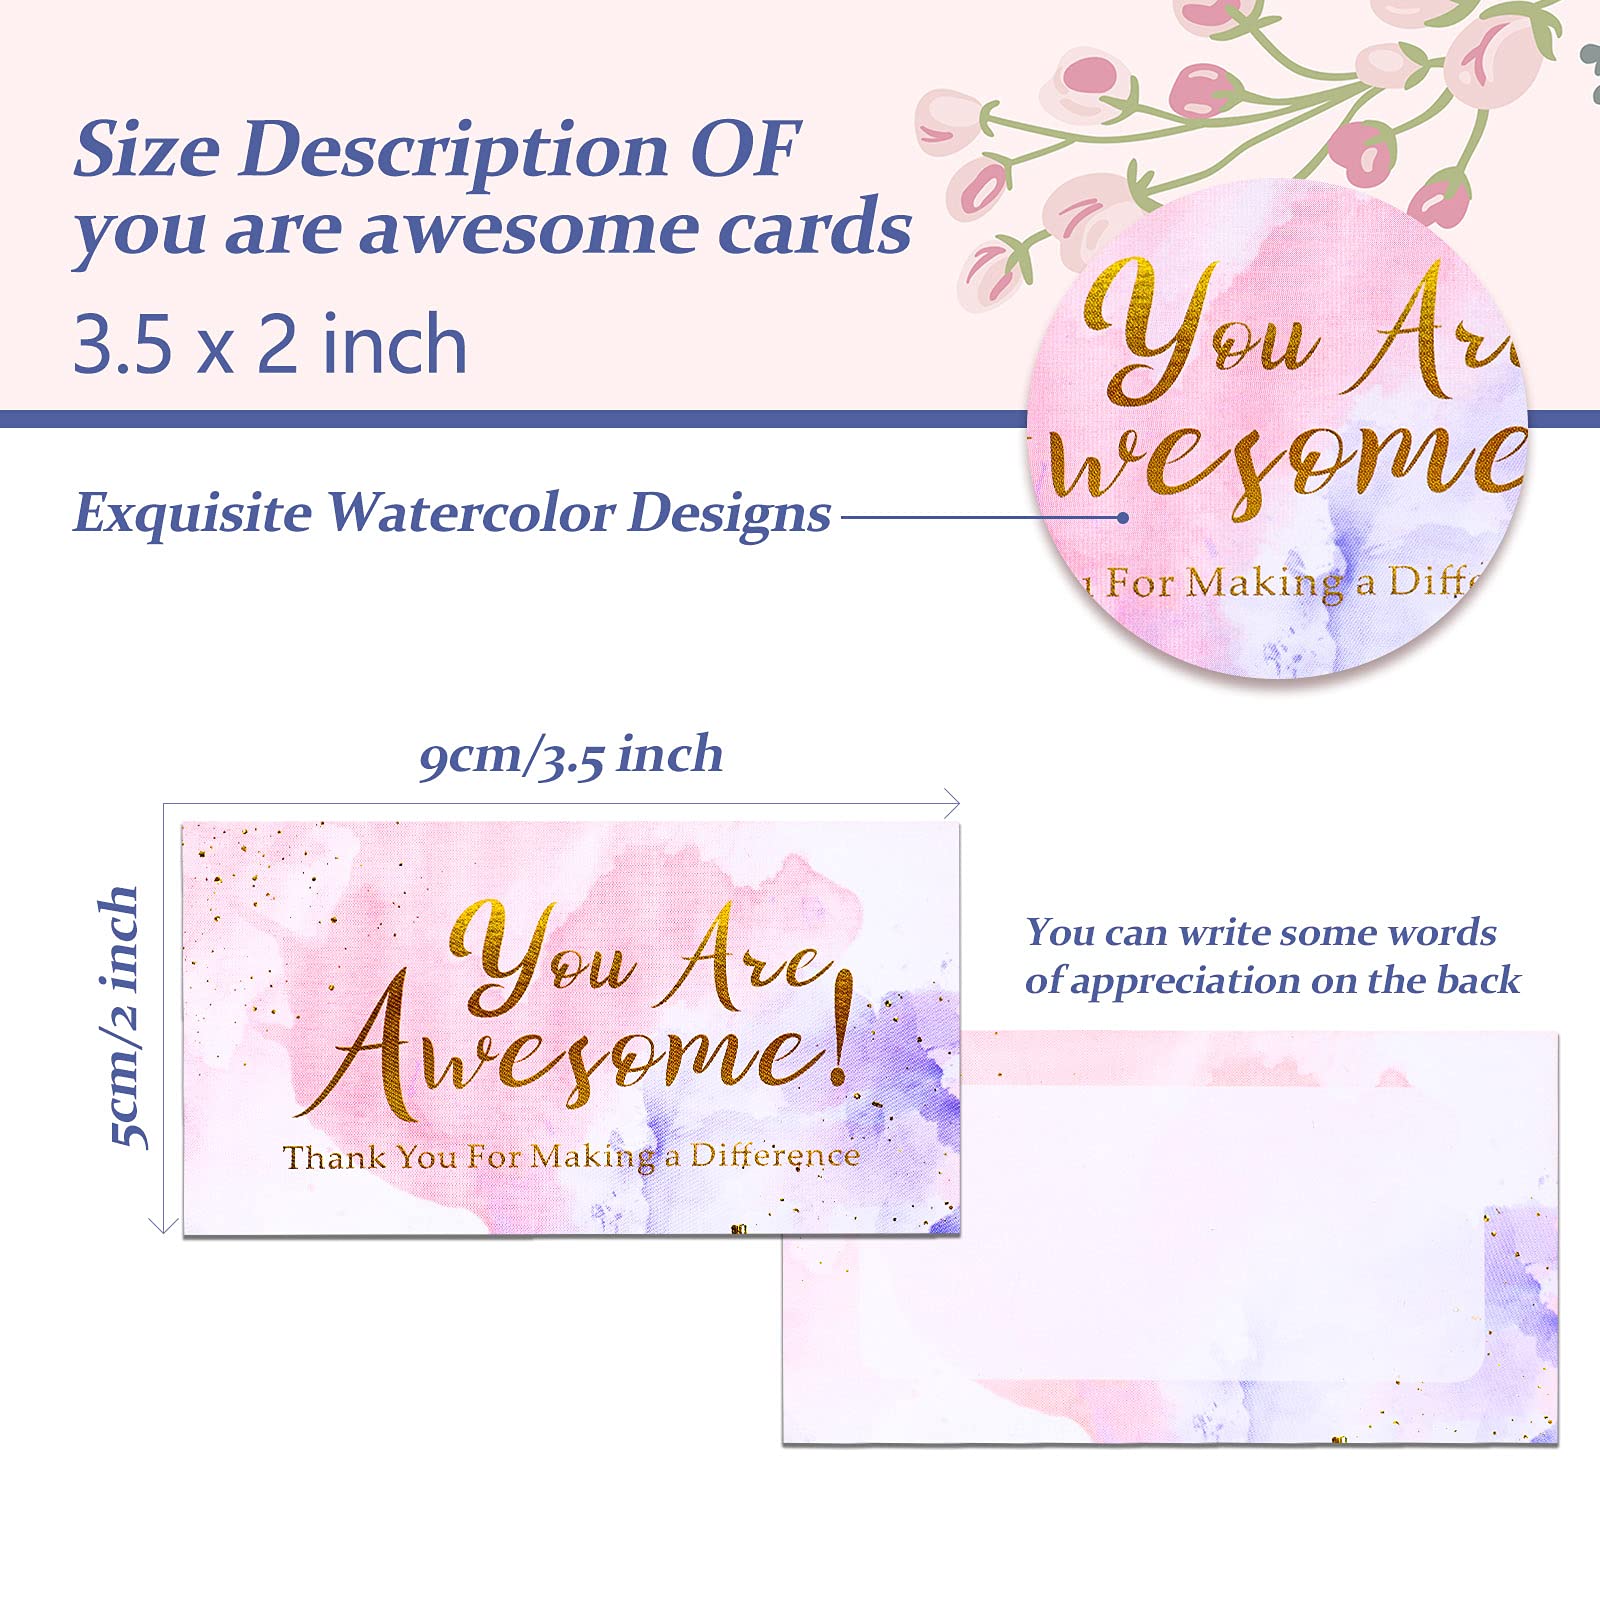 100 Pcs Appreciation Cards You Are Awesome Cards Positive Affirmations Cards Personalised Paper Nurse Appreciation Gifts Watercolor Thank You Postcards for Employee Doctor Teacher Baby Shower Wedding